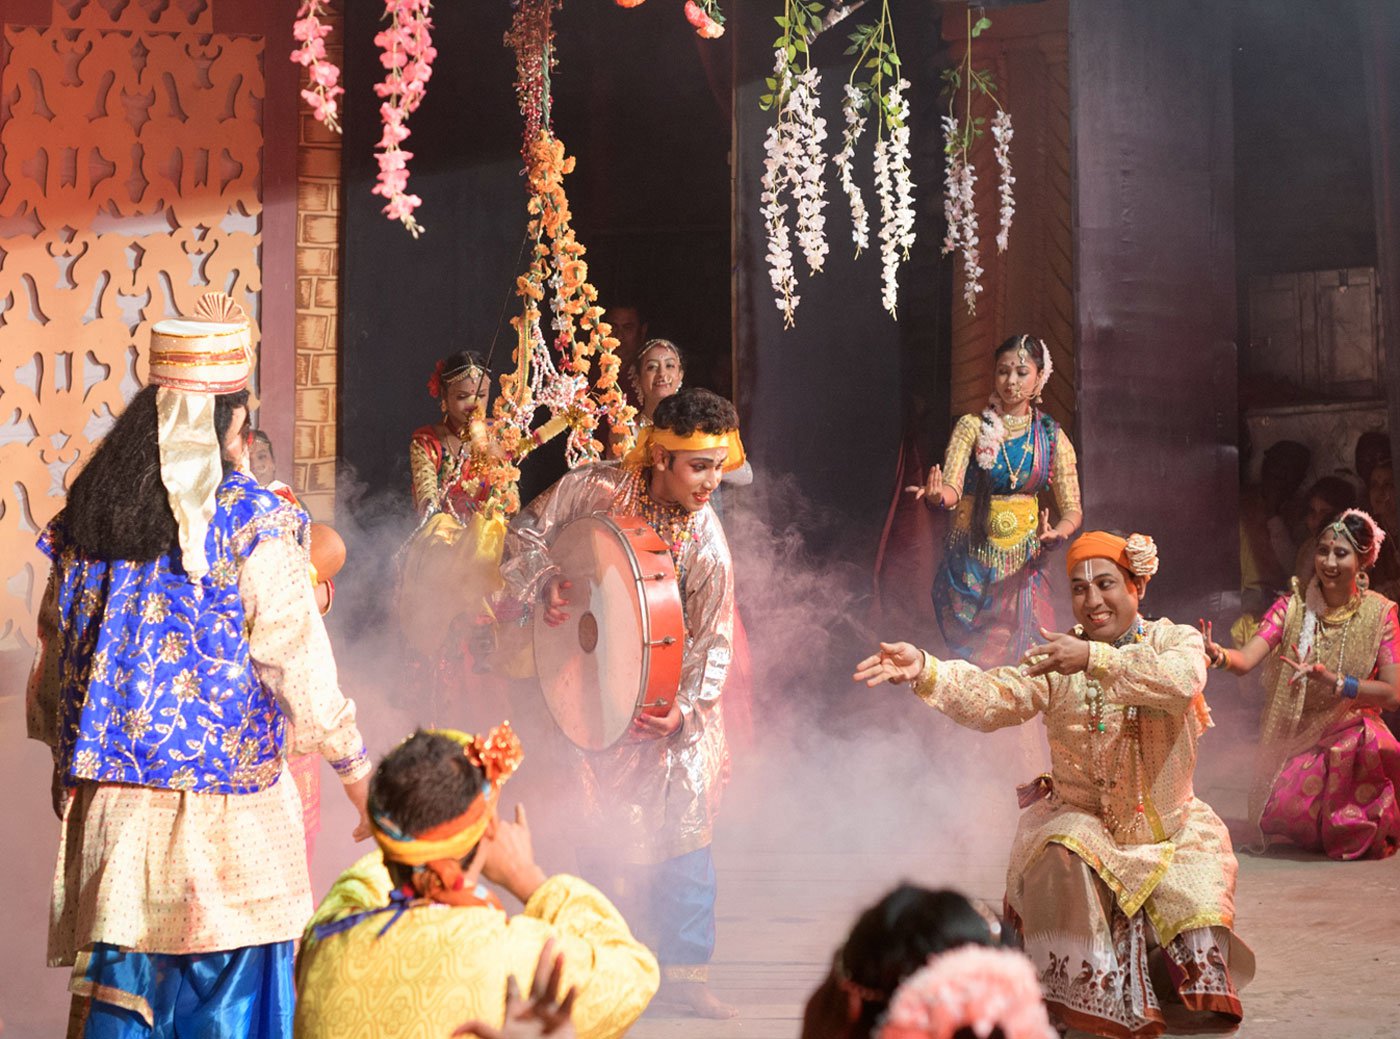 The Raas Mahotsav celebrates the life of Lord Krishna through dance, drama and musical performances. More than 100 characters may be depicted on stage during a single day of the festival